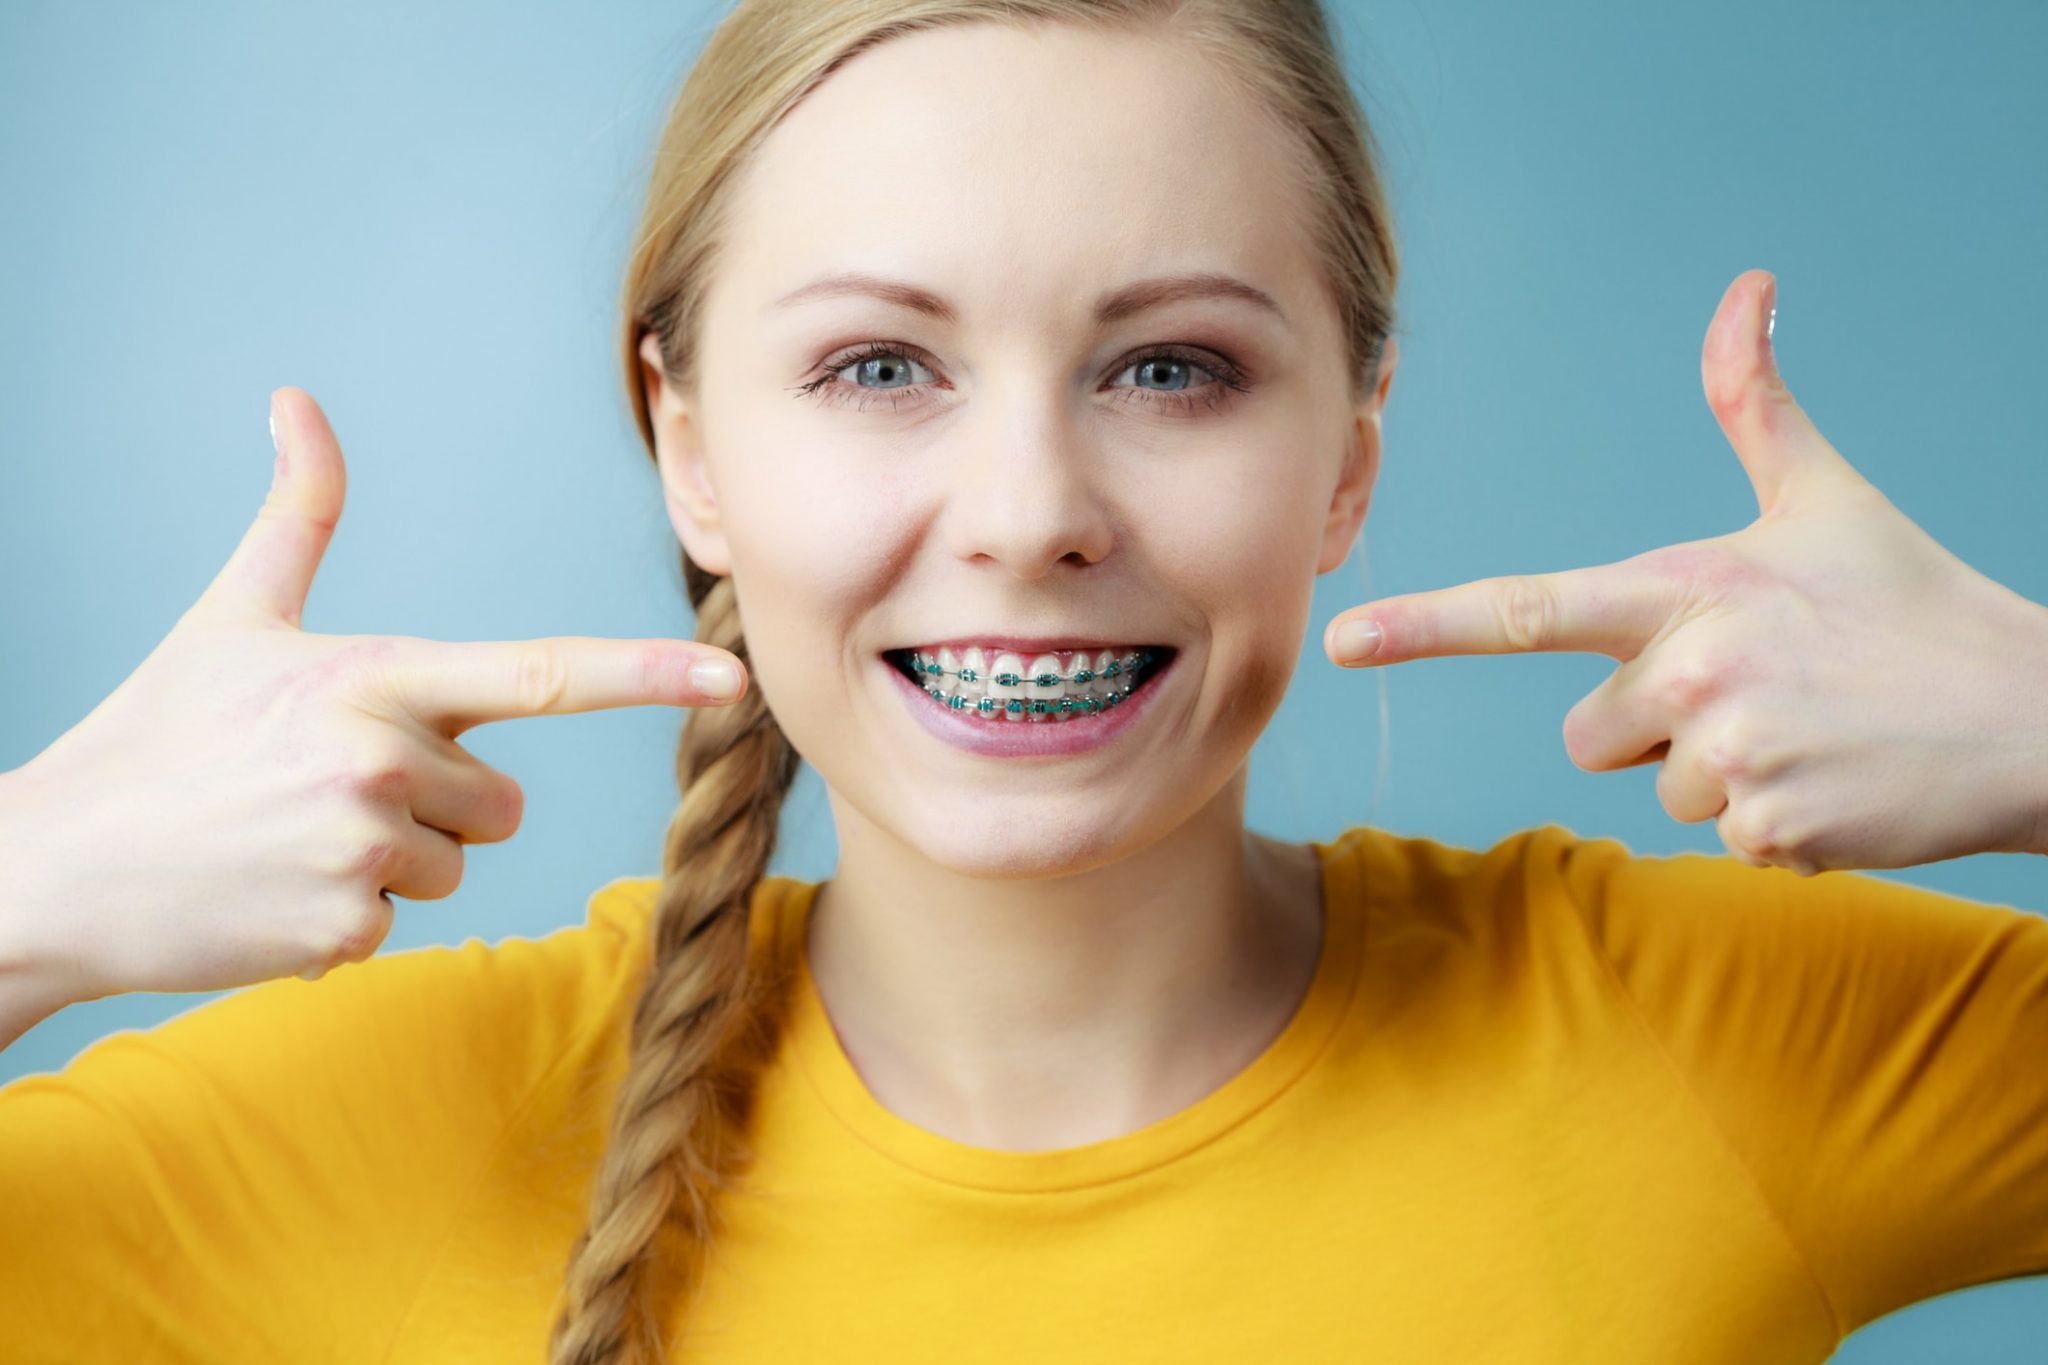 Blue Braces: How To Pick the Right Colors for Your Braces - Blue